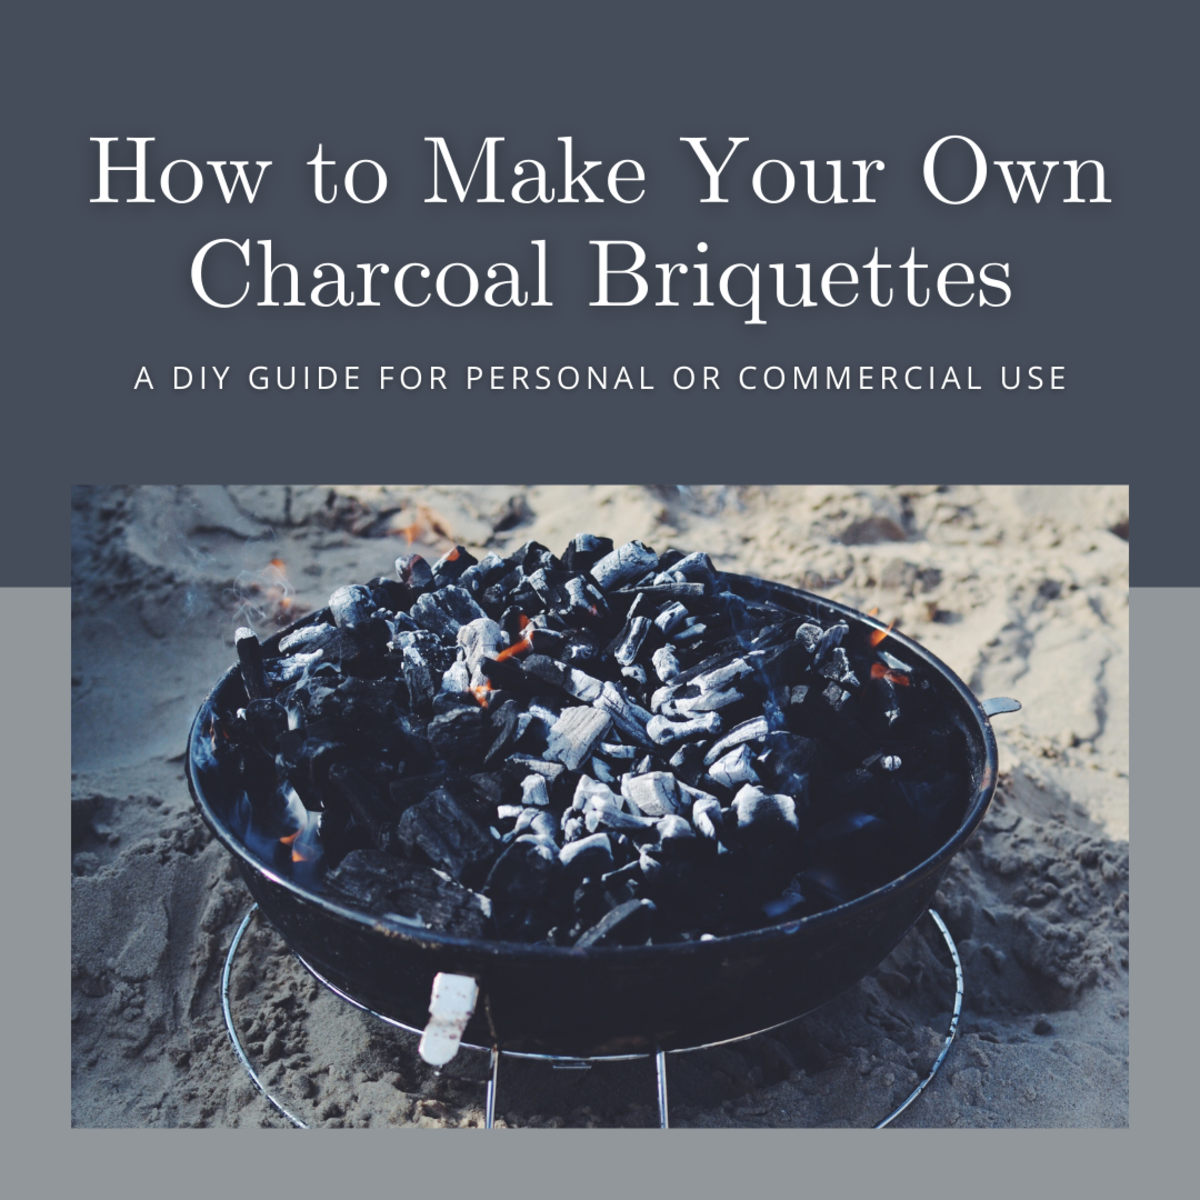 This article will provide you with all the information you need to start making your own charcoal briquettes.